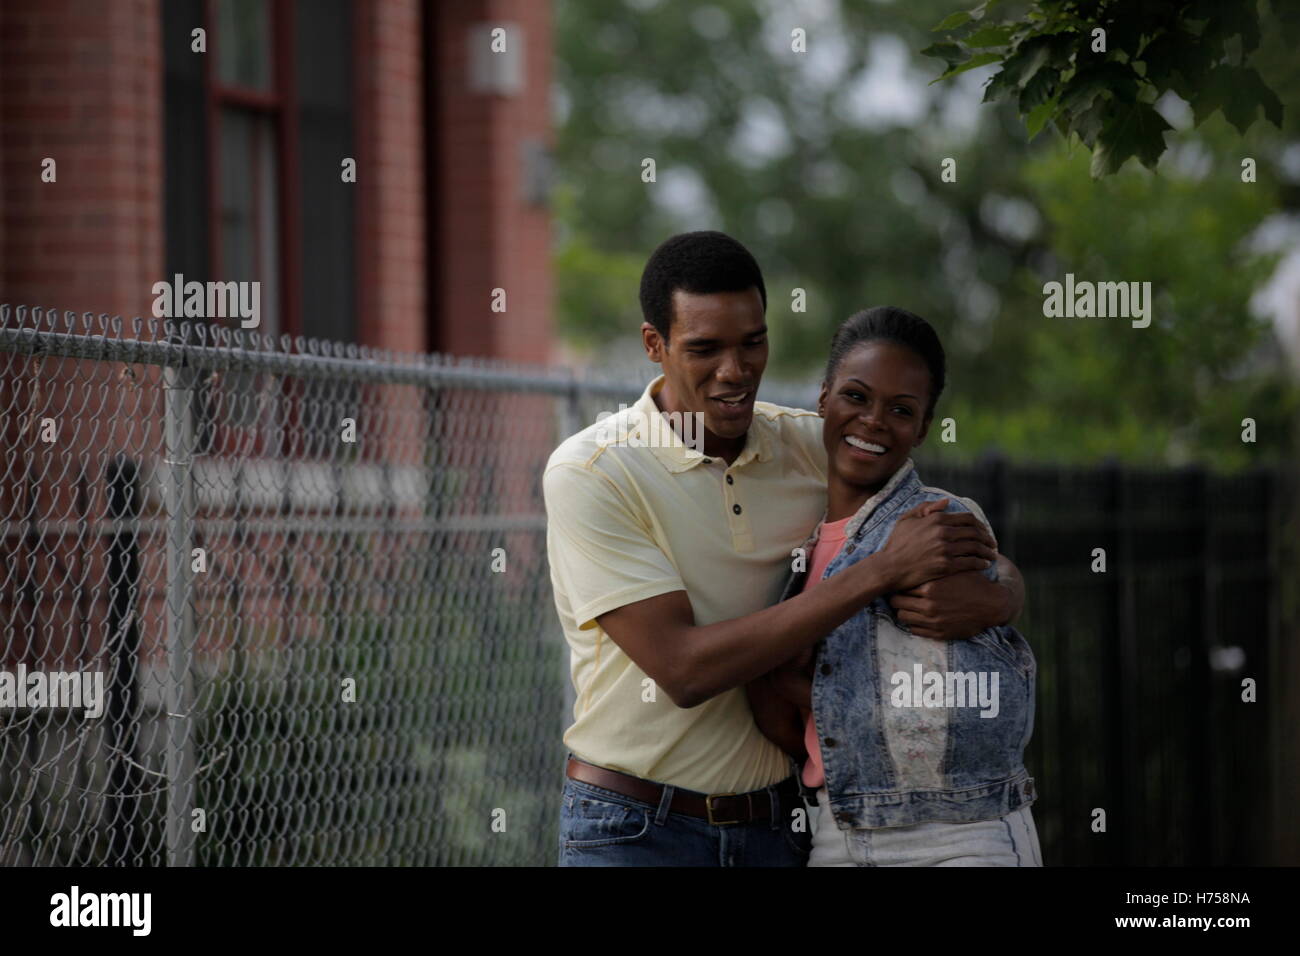 RELEASE DATE: August 26, 2016 TITLE: Southside With You STUDIO: Miramax Films DIRECTOR: Richard Tanne PLOT: Chronicles the summer 1989 afternoon when the future President of the United States of America, Barack Obama, wooed his future First Lady on an epic first date across Chicago's South Side PICTURED: Parker Sawyers as Barack Obama, Tika Sumpter as Michelle Robinson. (Credit Image: c Miramax Films/Entertainment Pictures/) Stock Photo